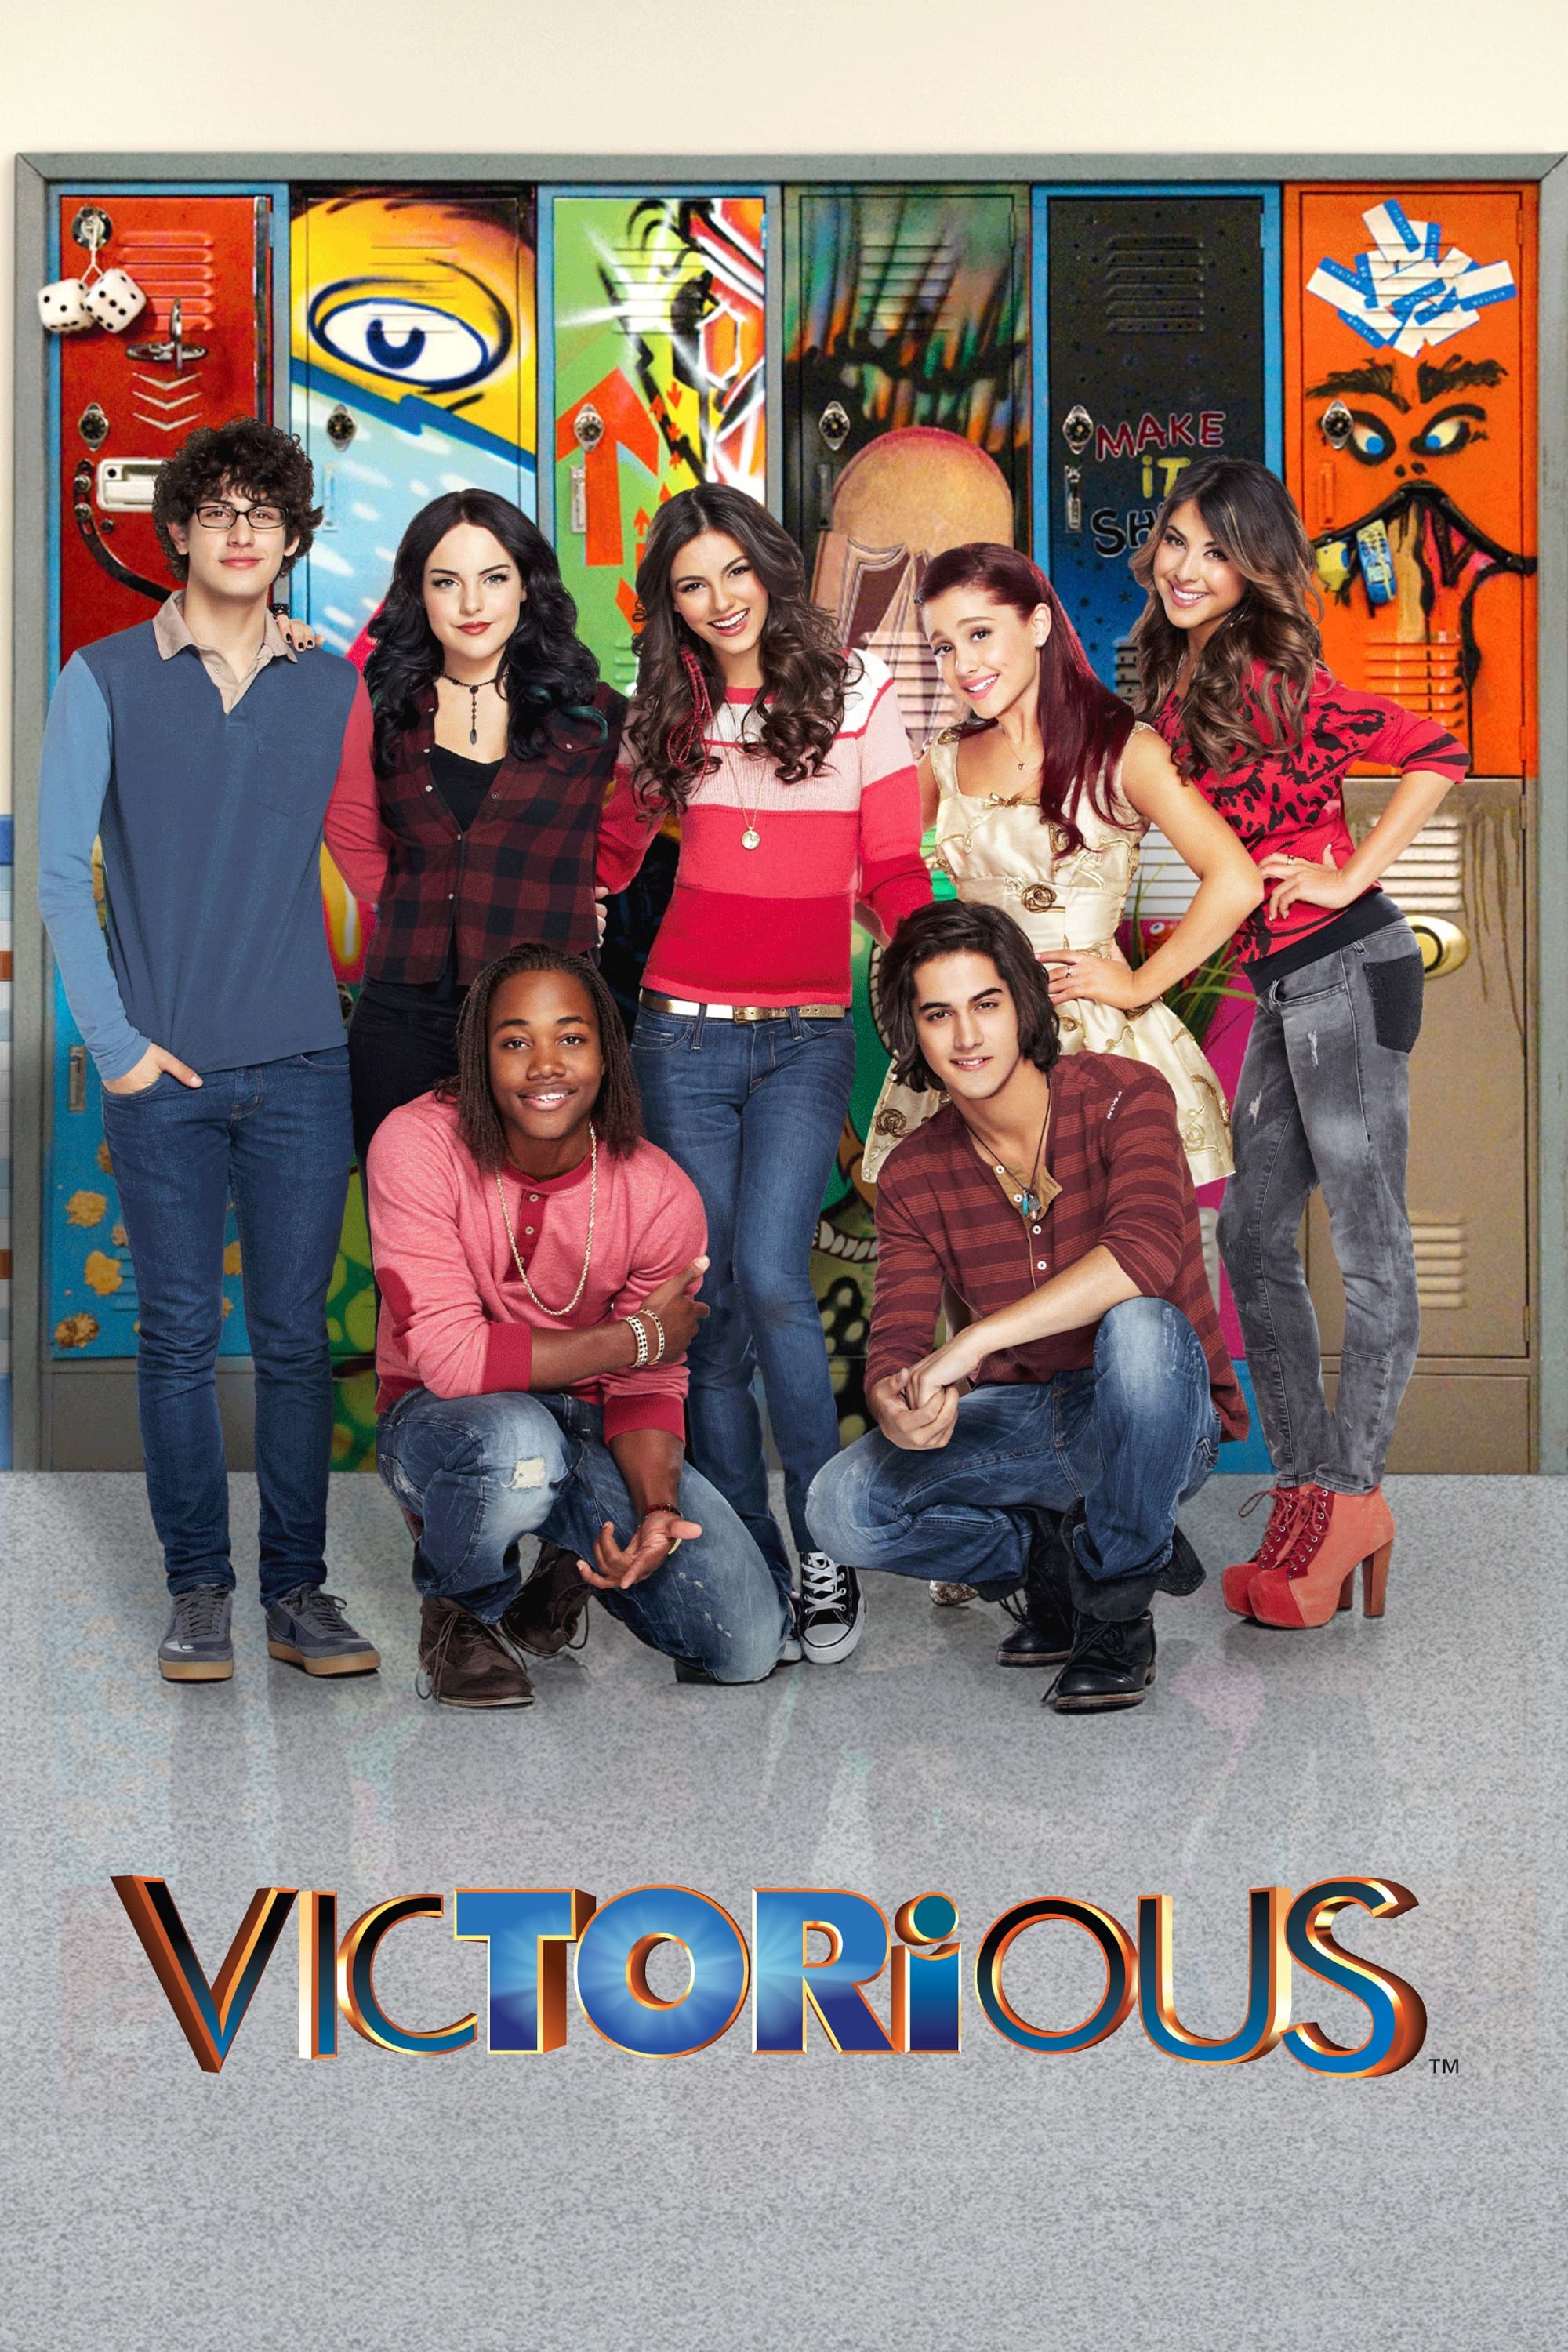 iParty with Victorious - Wikipedia